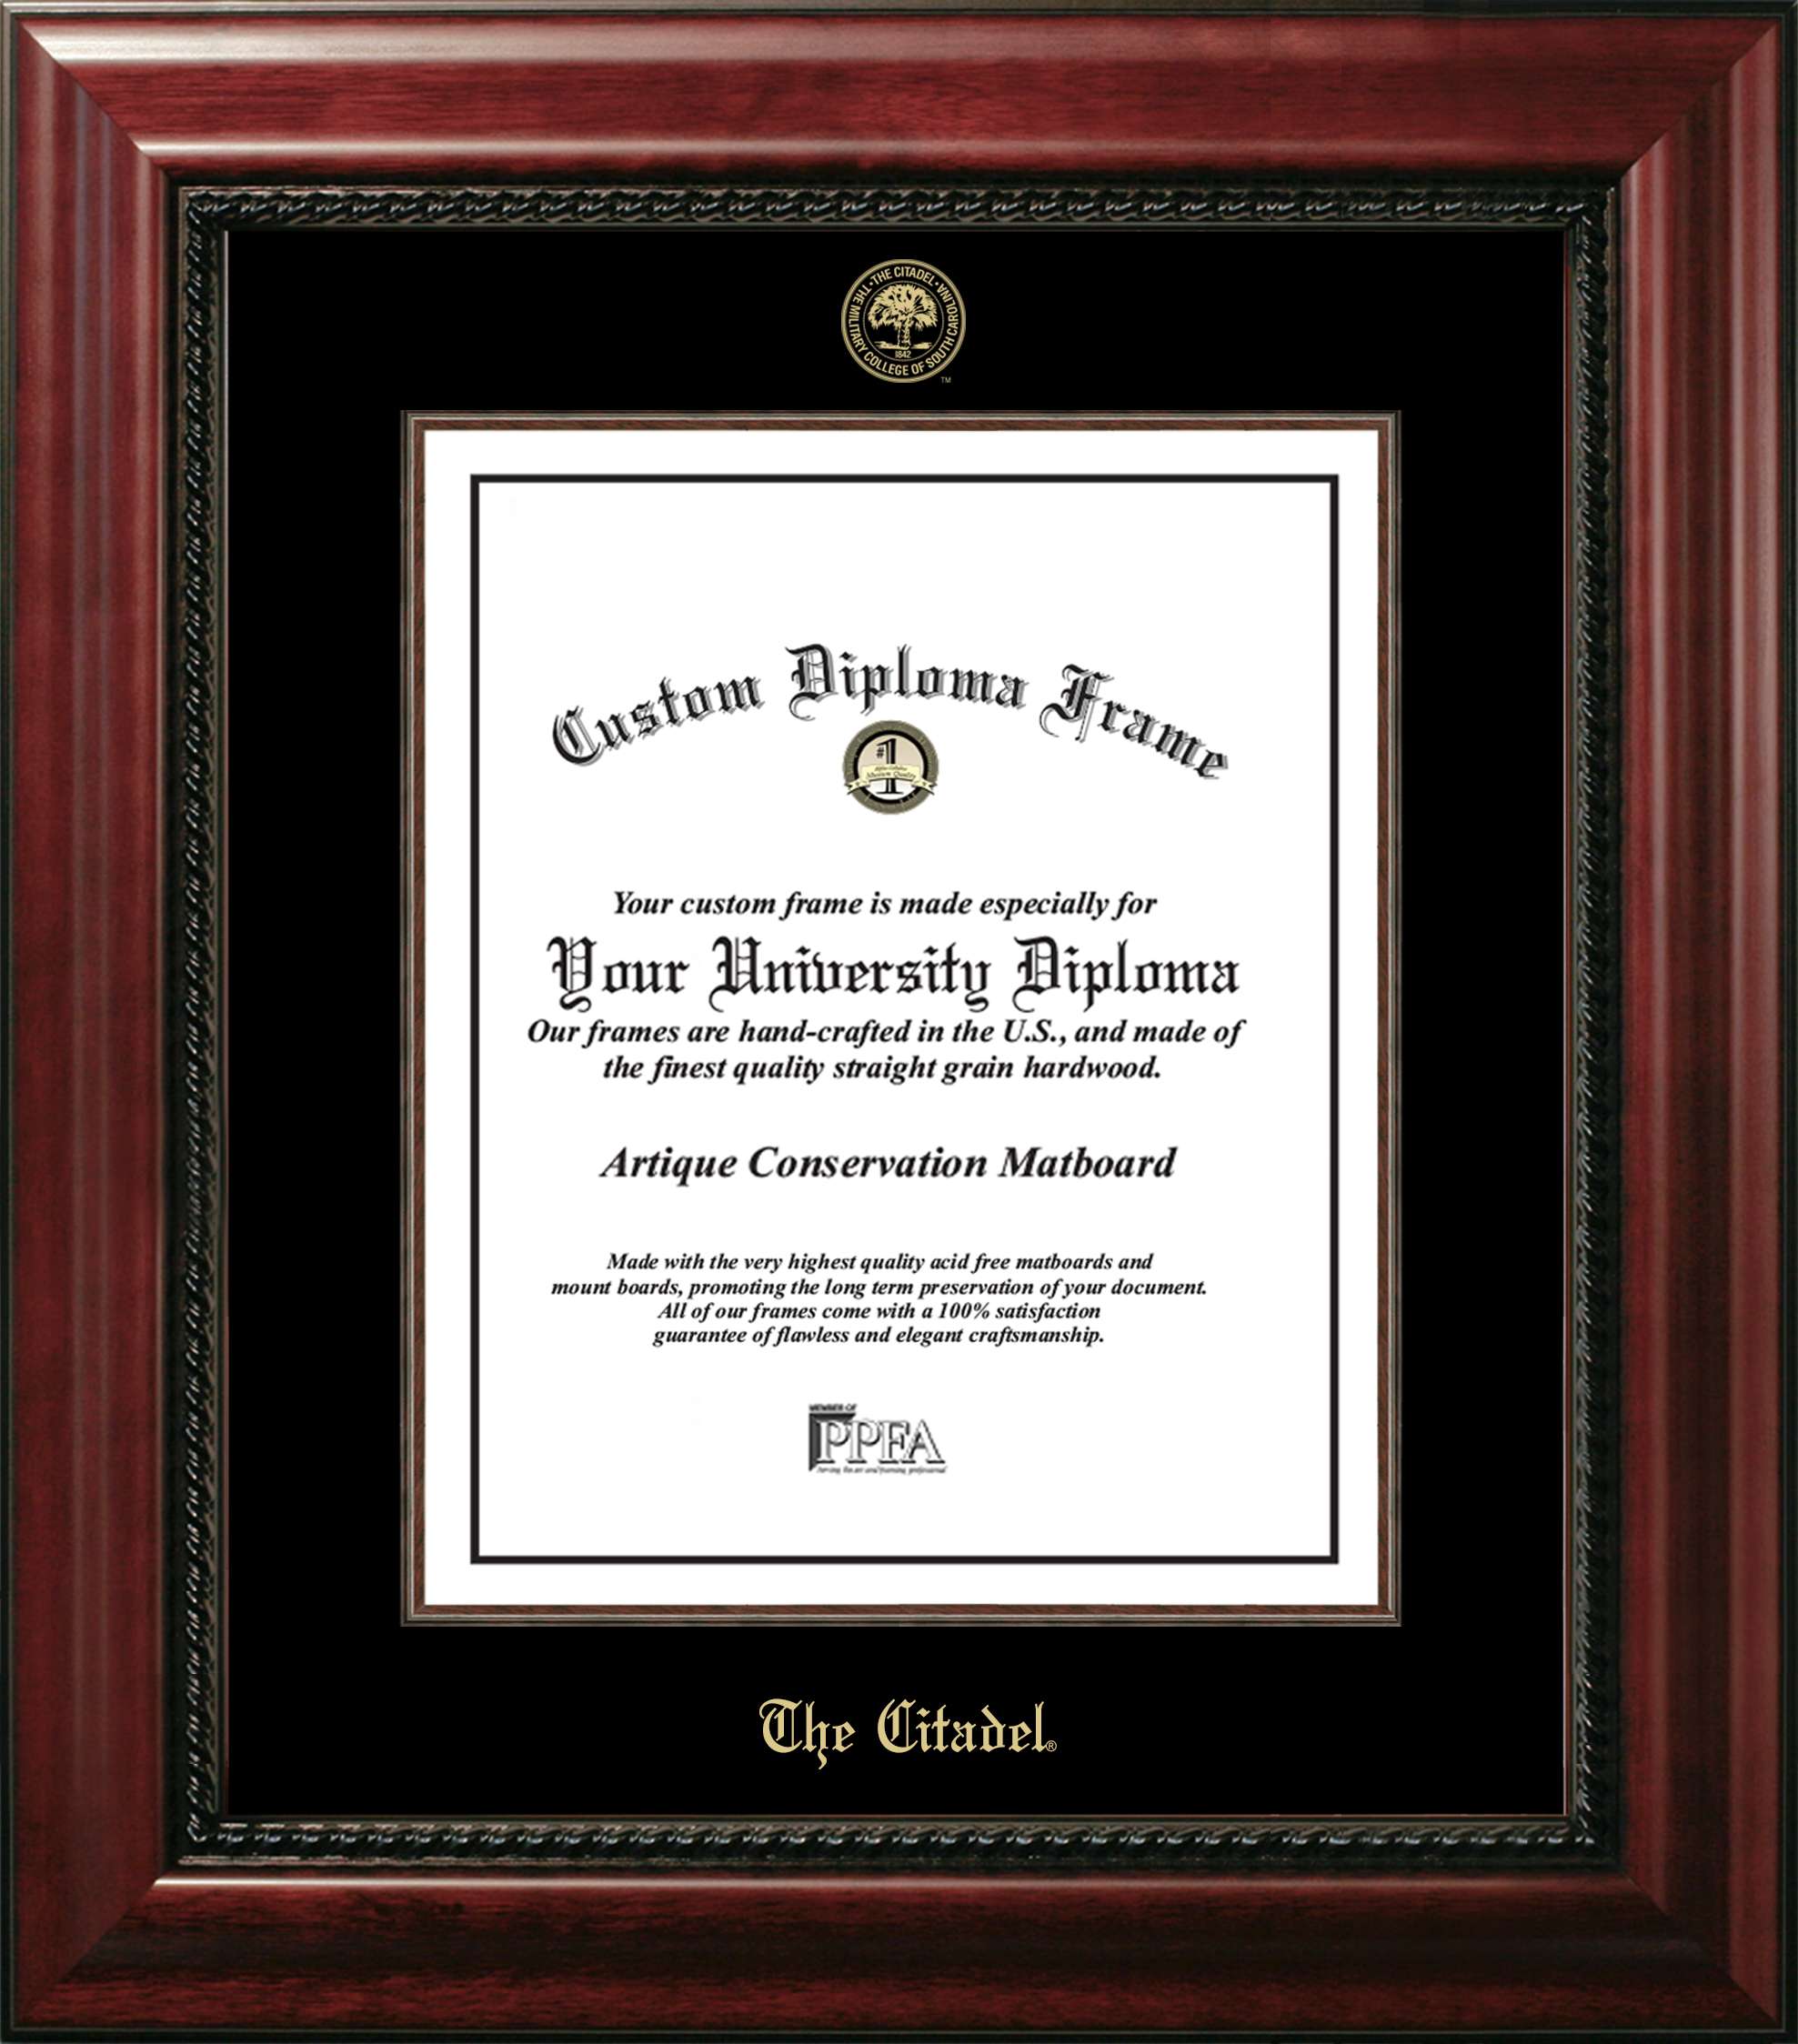 Campus Images SC993EXM-1620 20 x 16 in. The Citadel Executive Diploma Frame